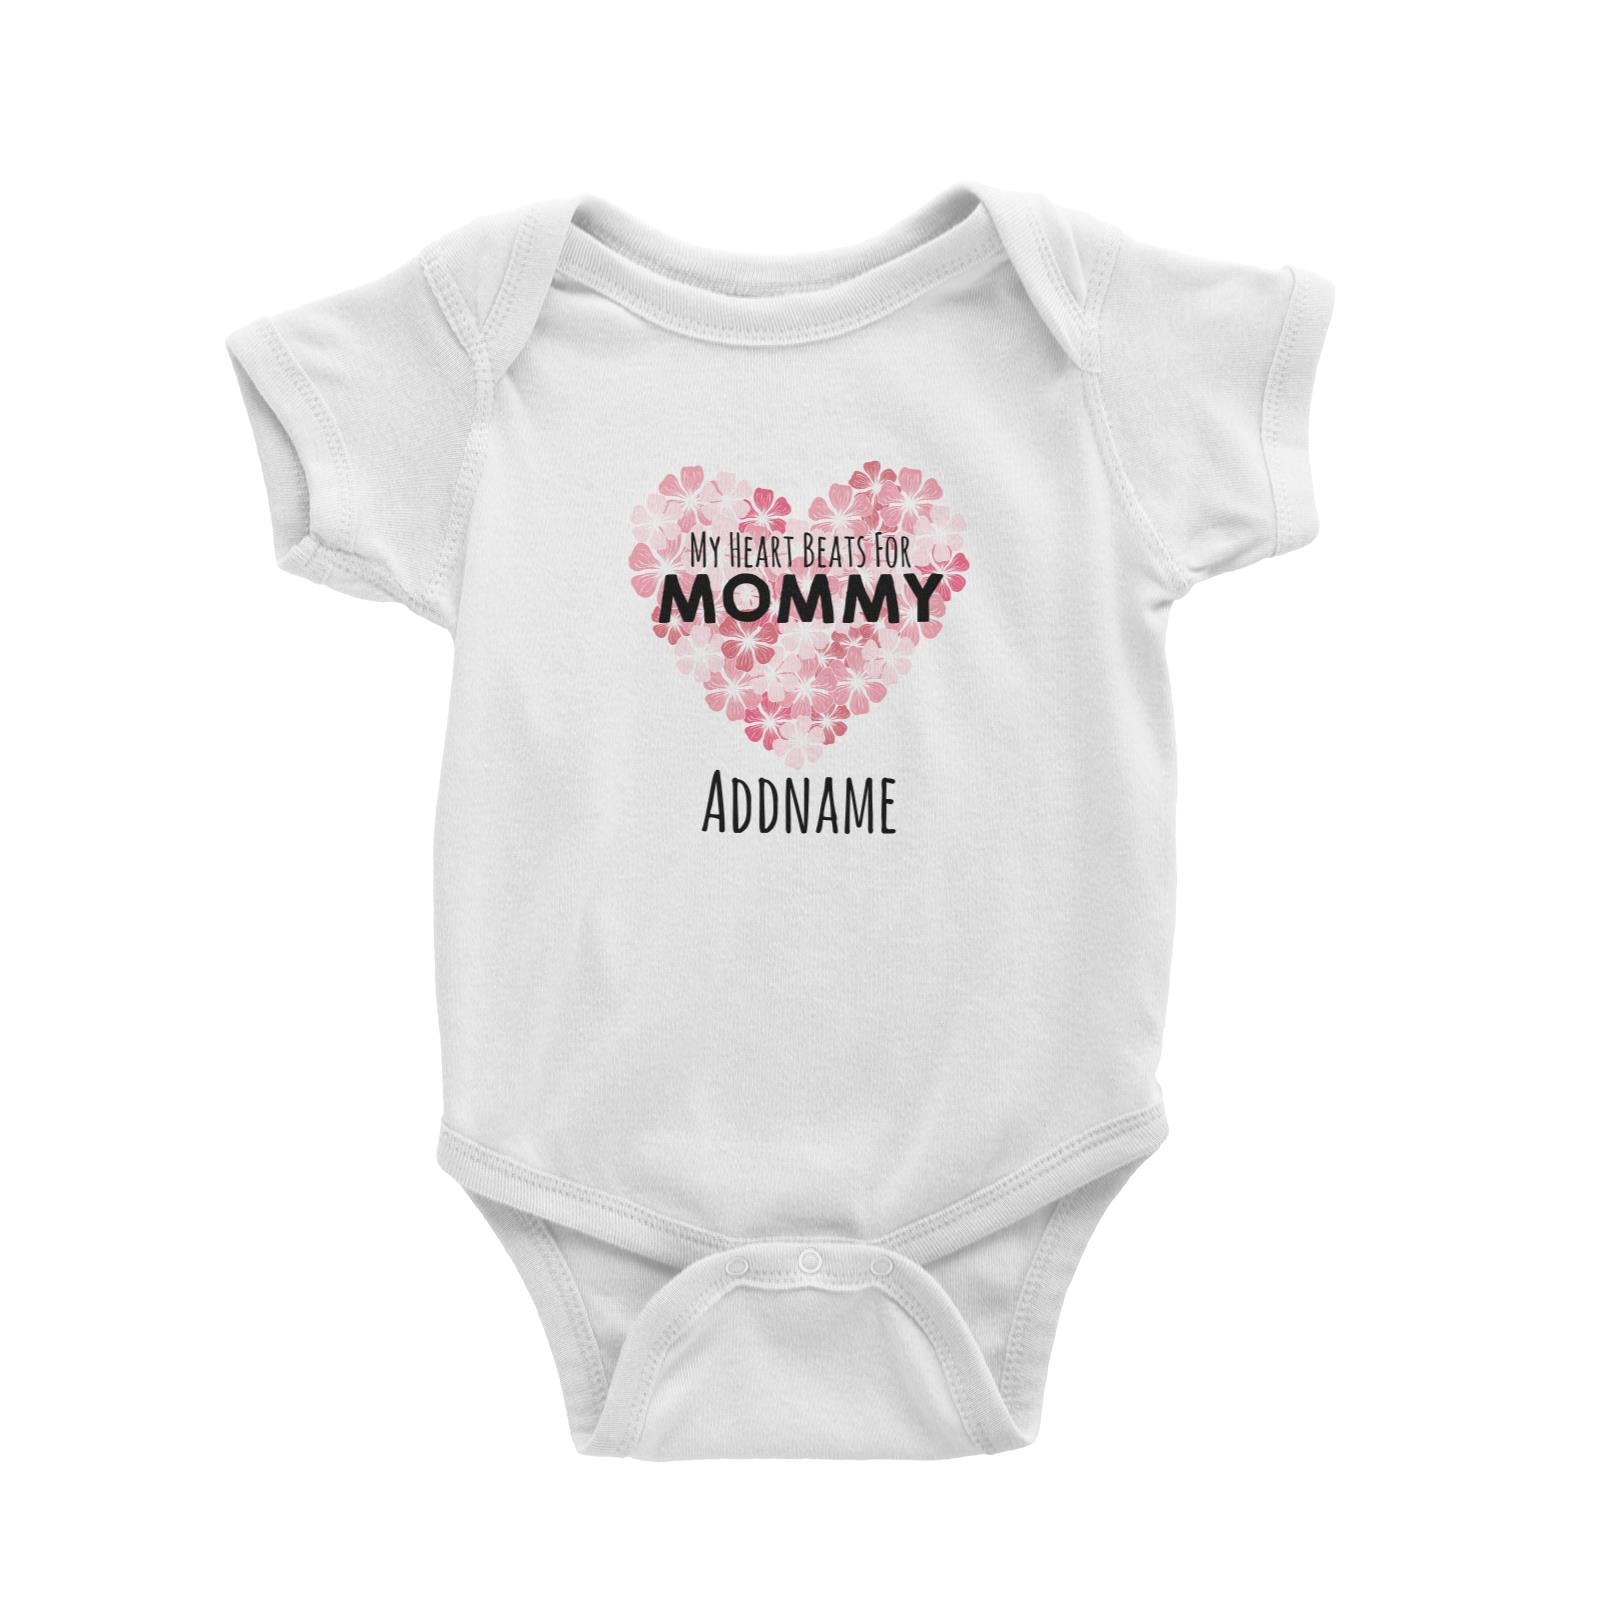 Drawn Mom & Dad Love Heart Beats for Mommy Addname Baby Romper